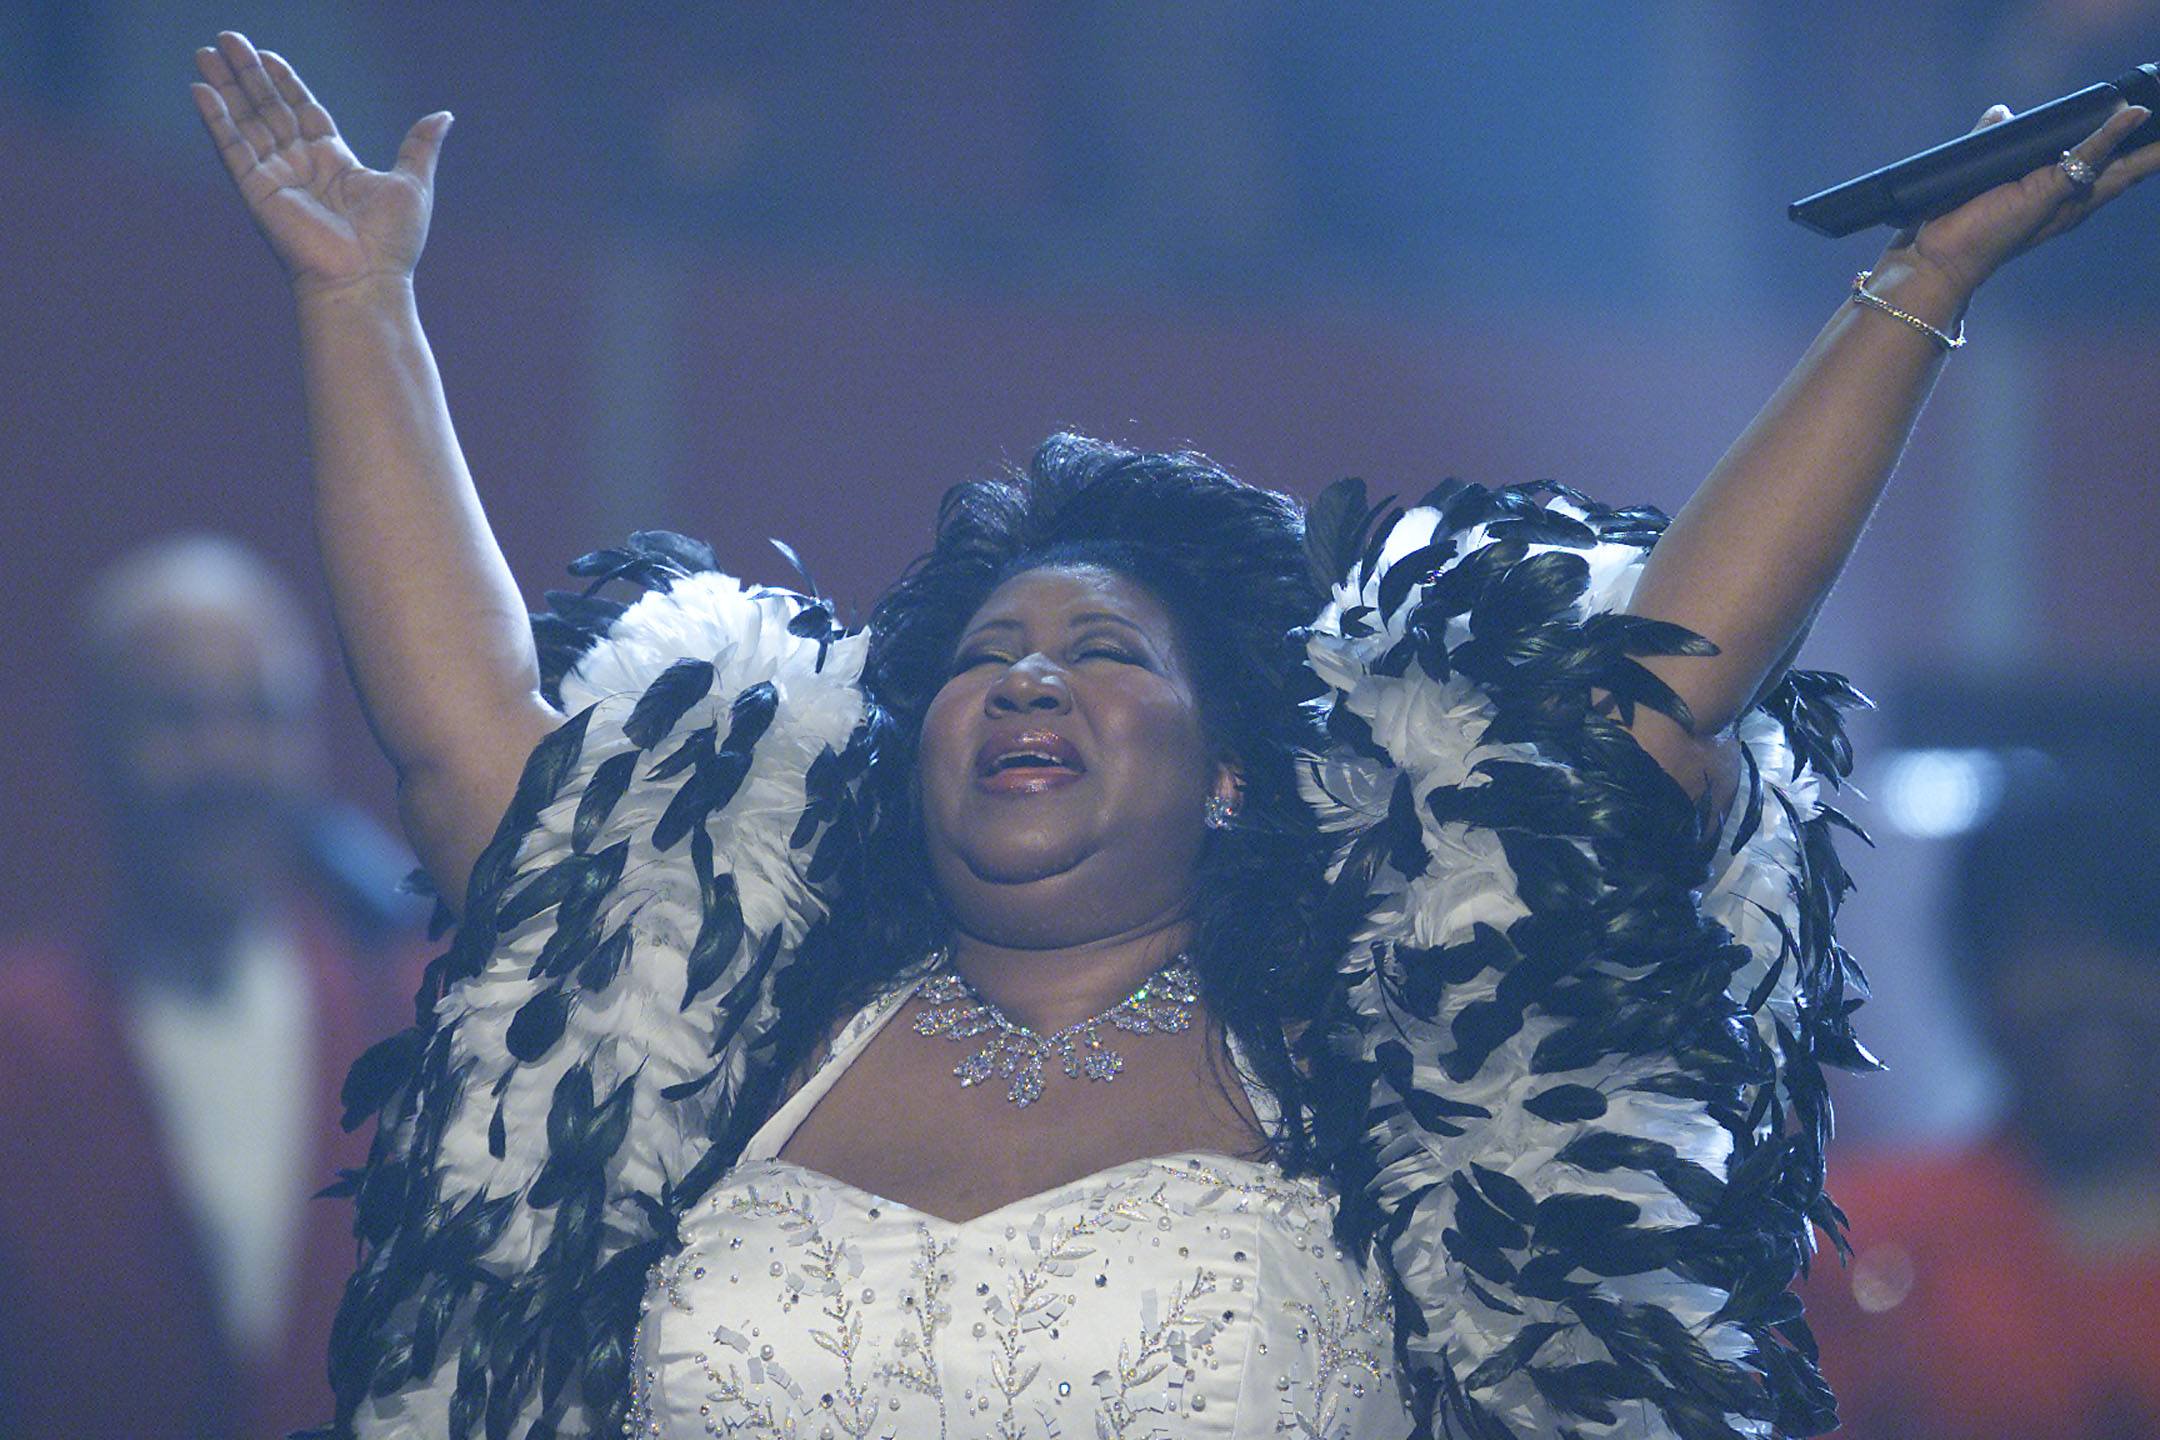 Aretha Franklin onstage performing at 'VH1 Divas Live: The One and Only Aretha Franklin' held at Radio City Music Hall in New York City on Tuesday, April 10, 2001